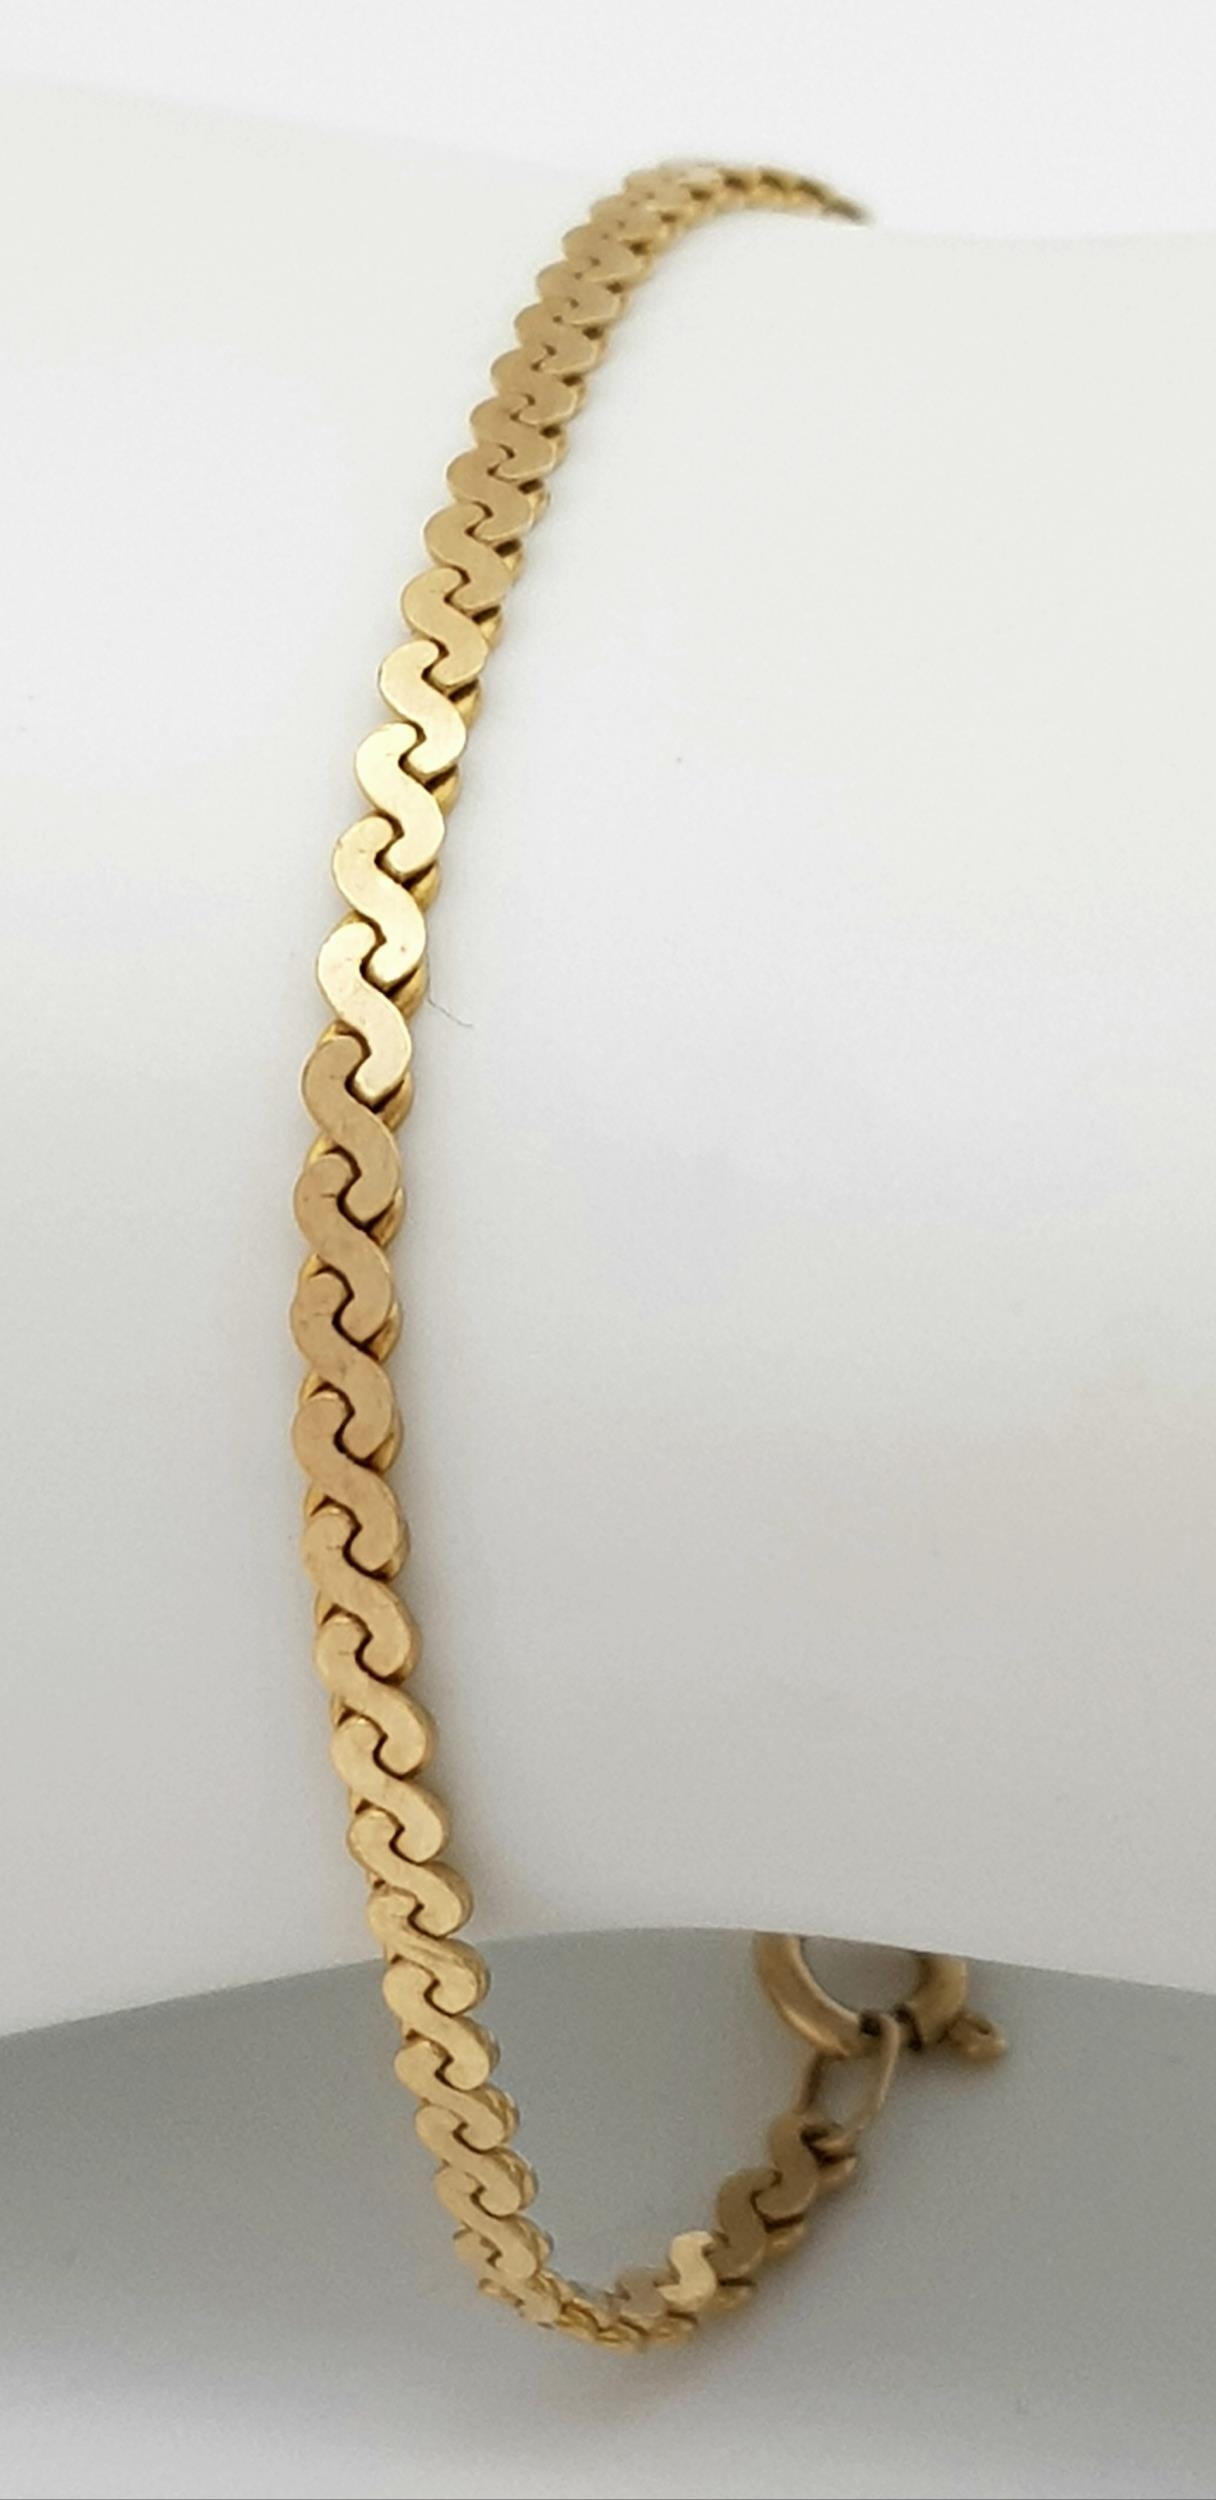 A 9K Yellow Gold Serpentine Link Bracelet. 17cm. 3.9g weight. - Image 2 of 5